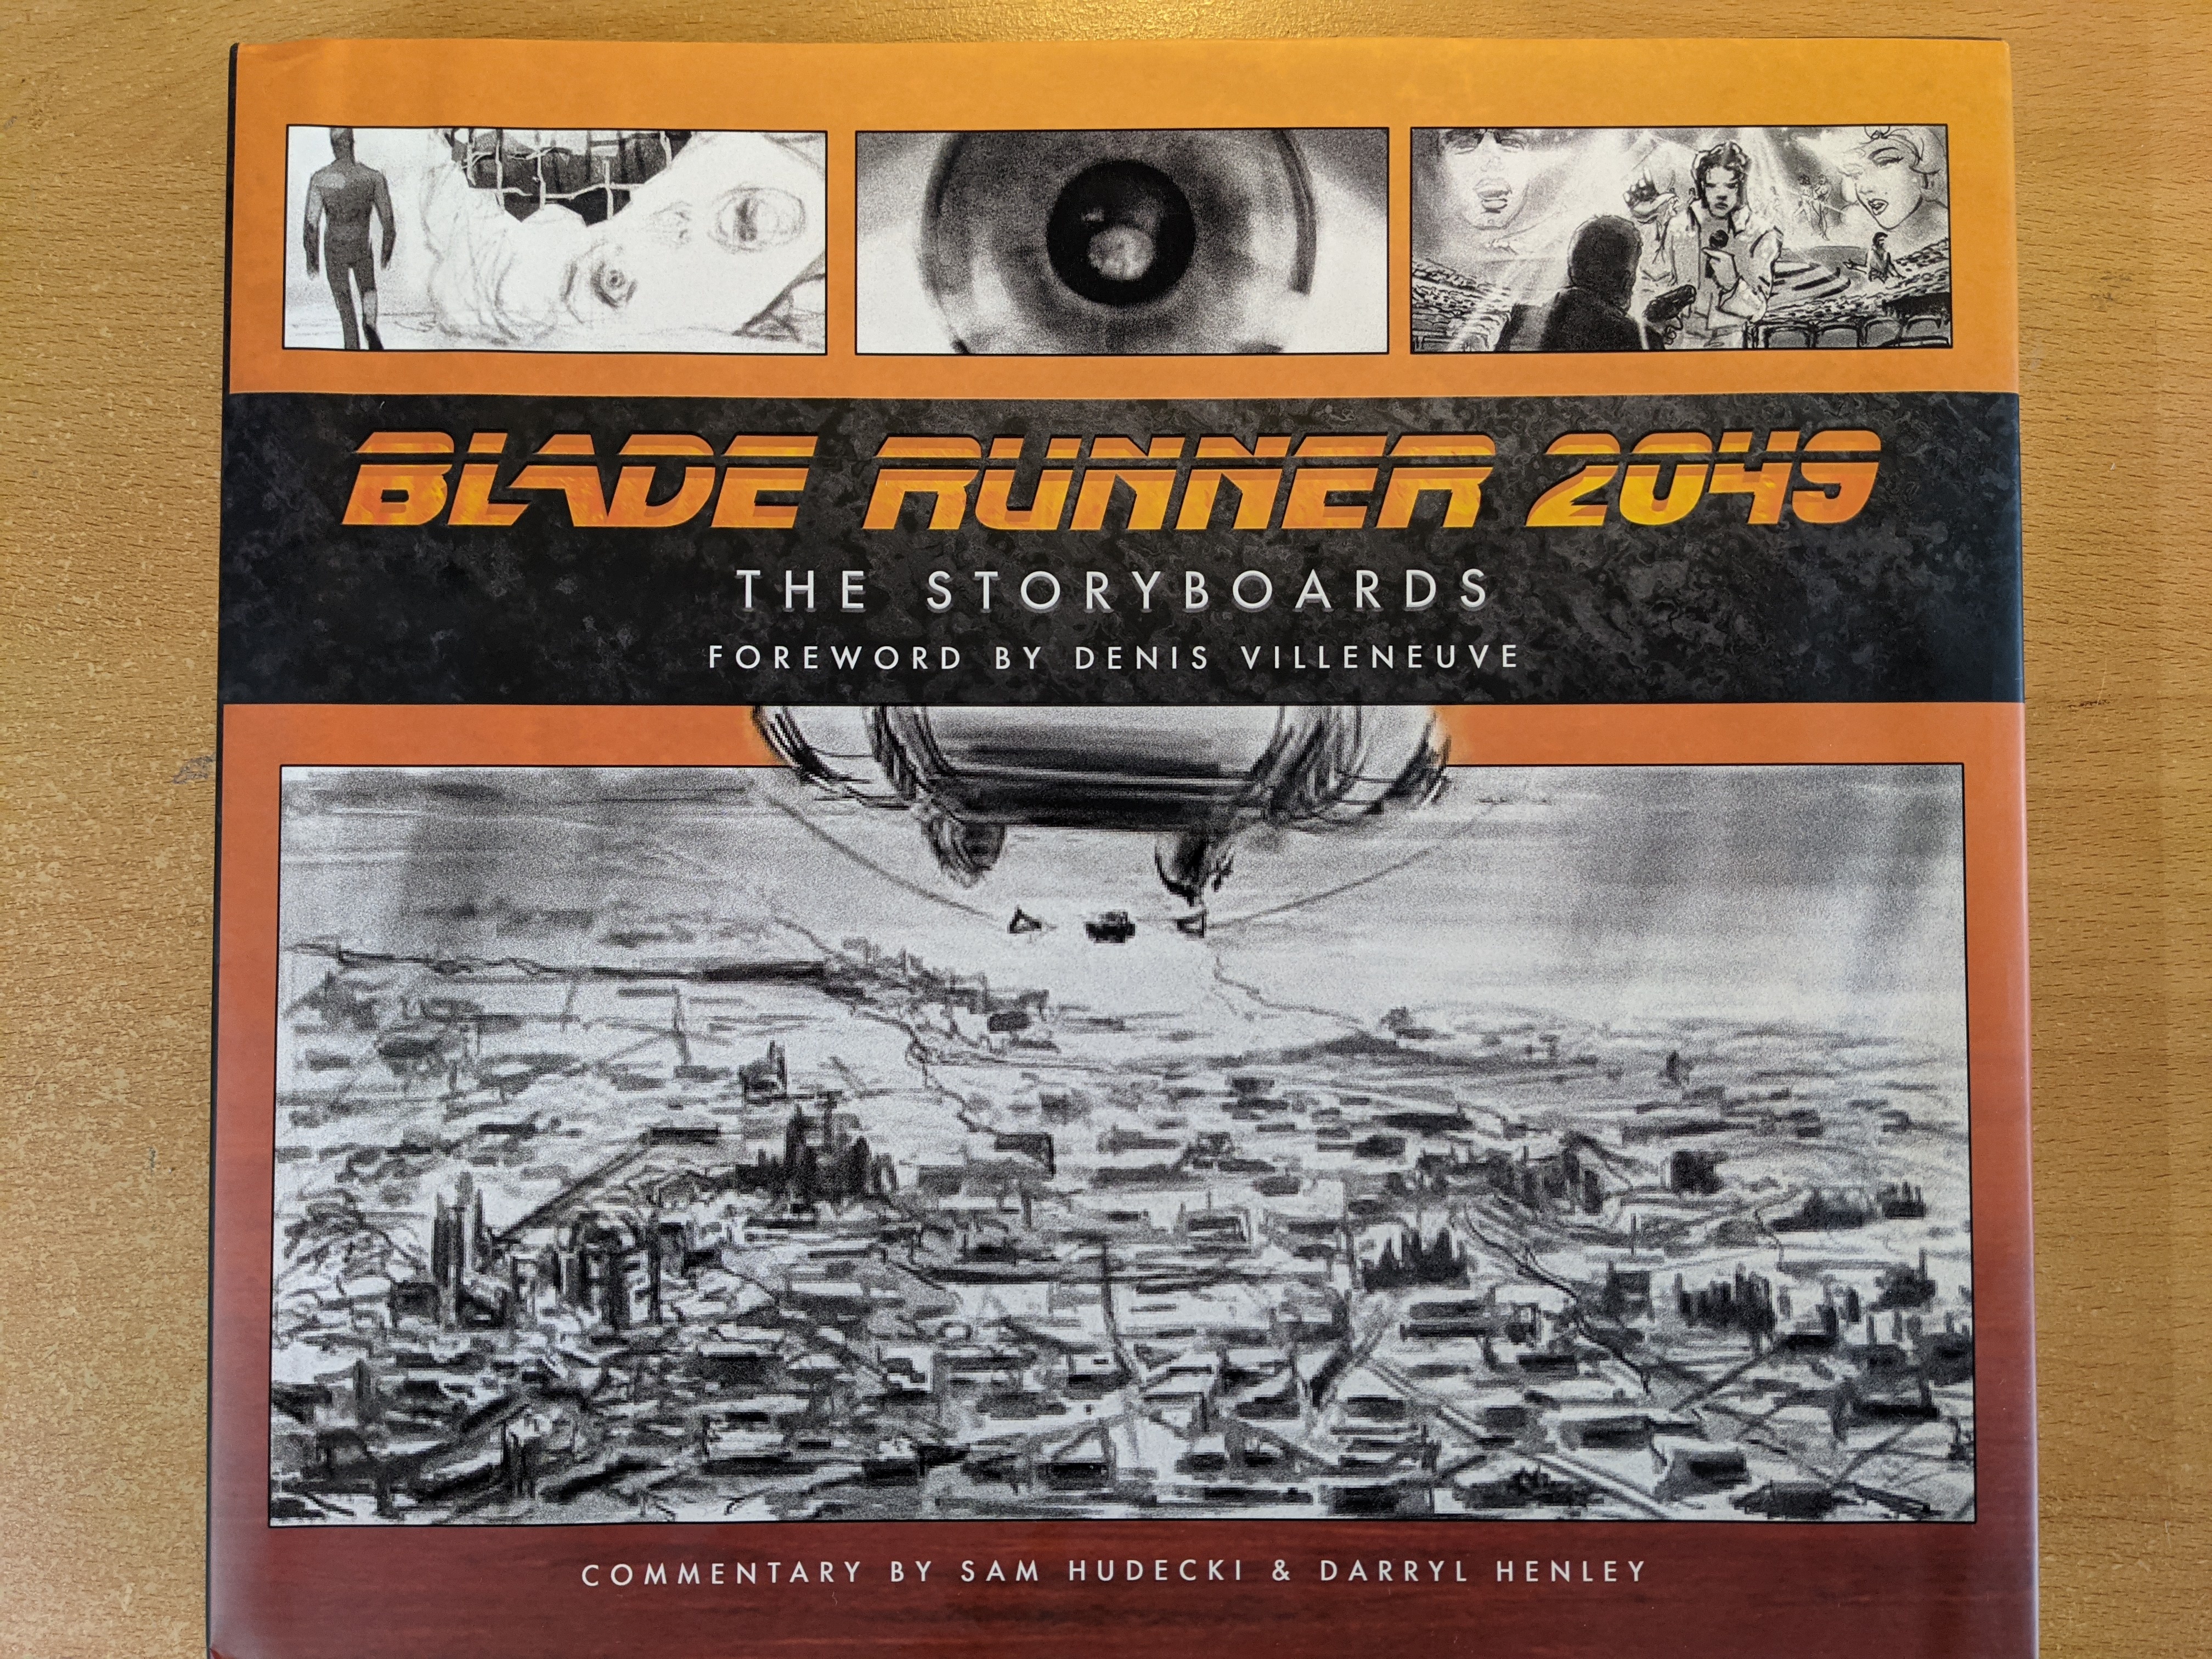 Blade-Runner-2049-The-Storyboards-cover